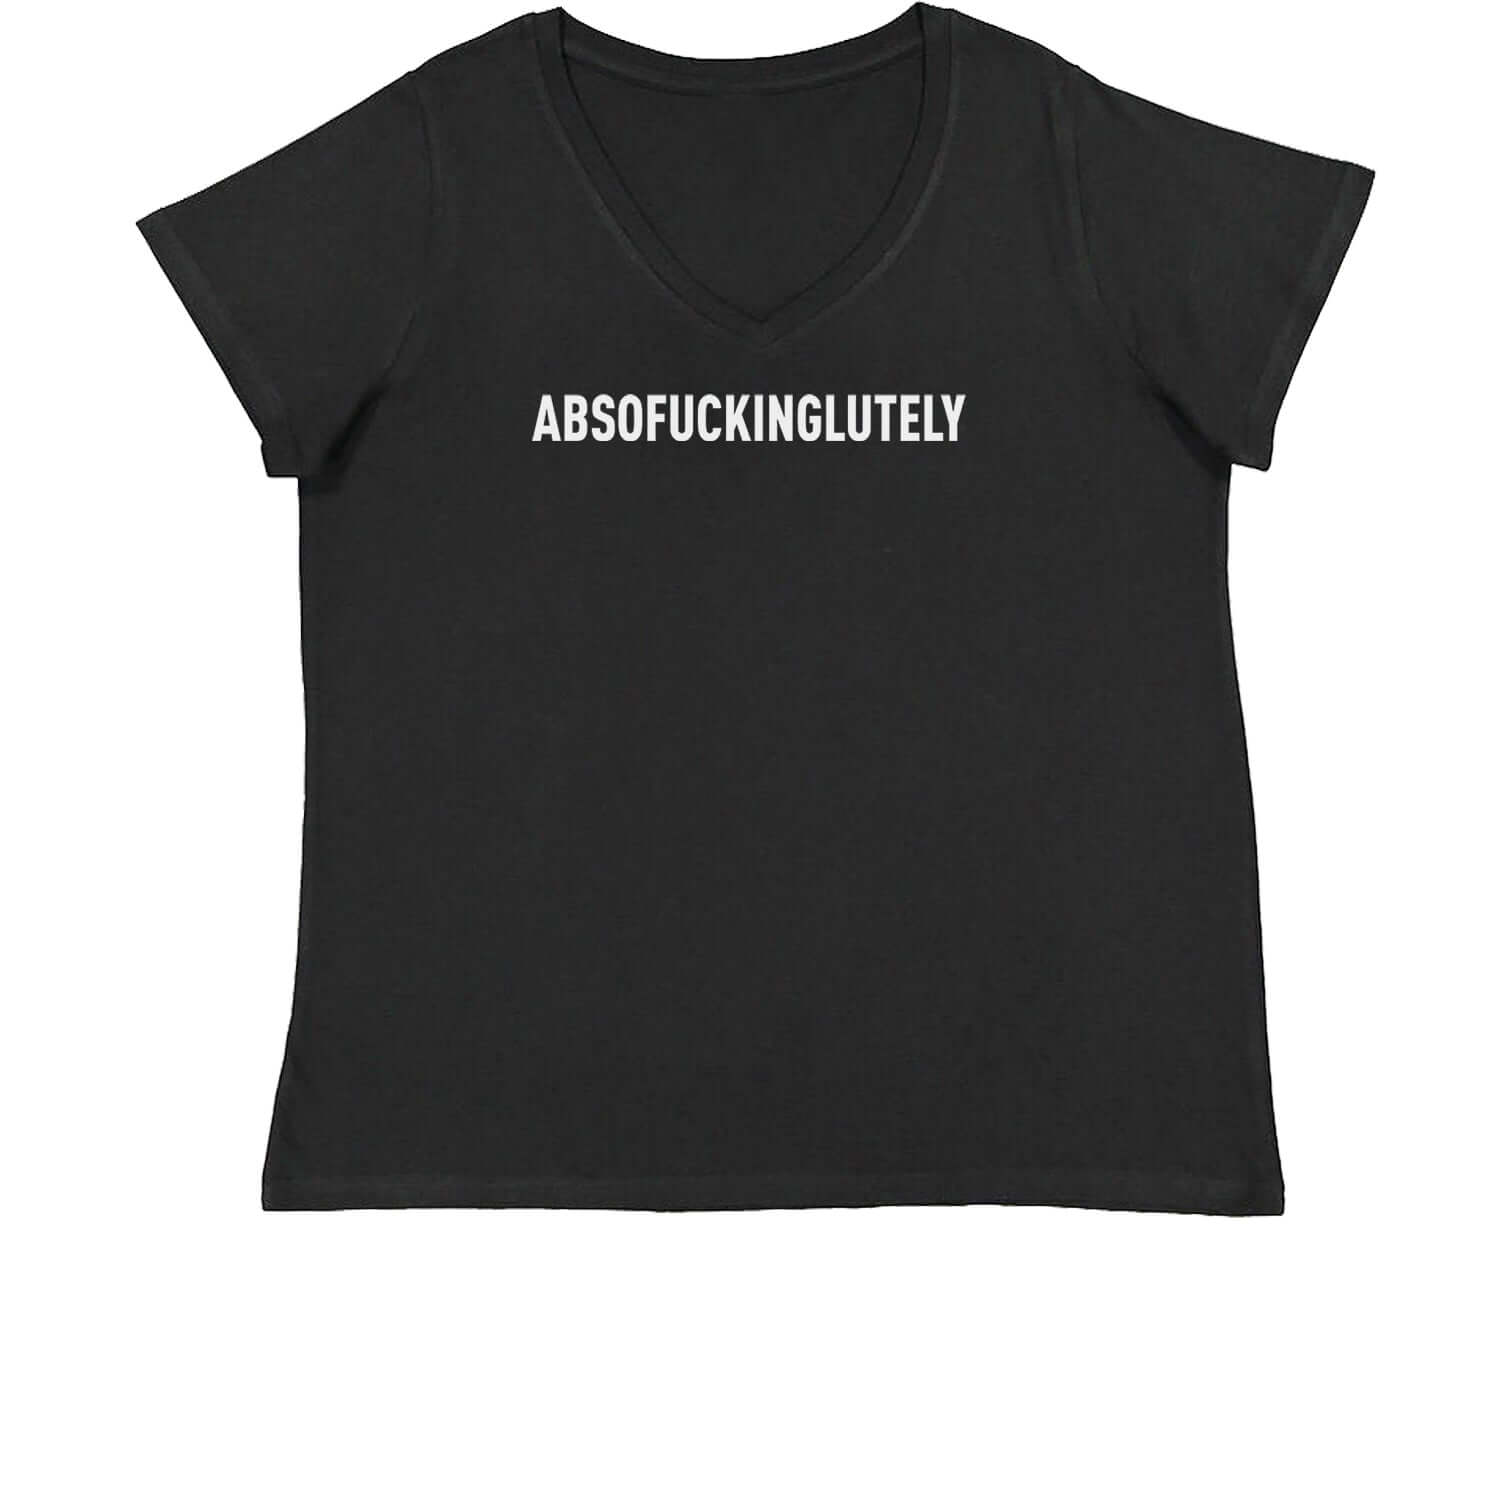 Abso f-cking lutely Womens Plus Size V-Neck T-shirt funny, shirt by Expression Tees